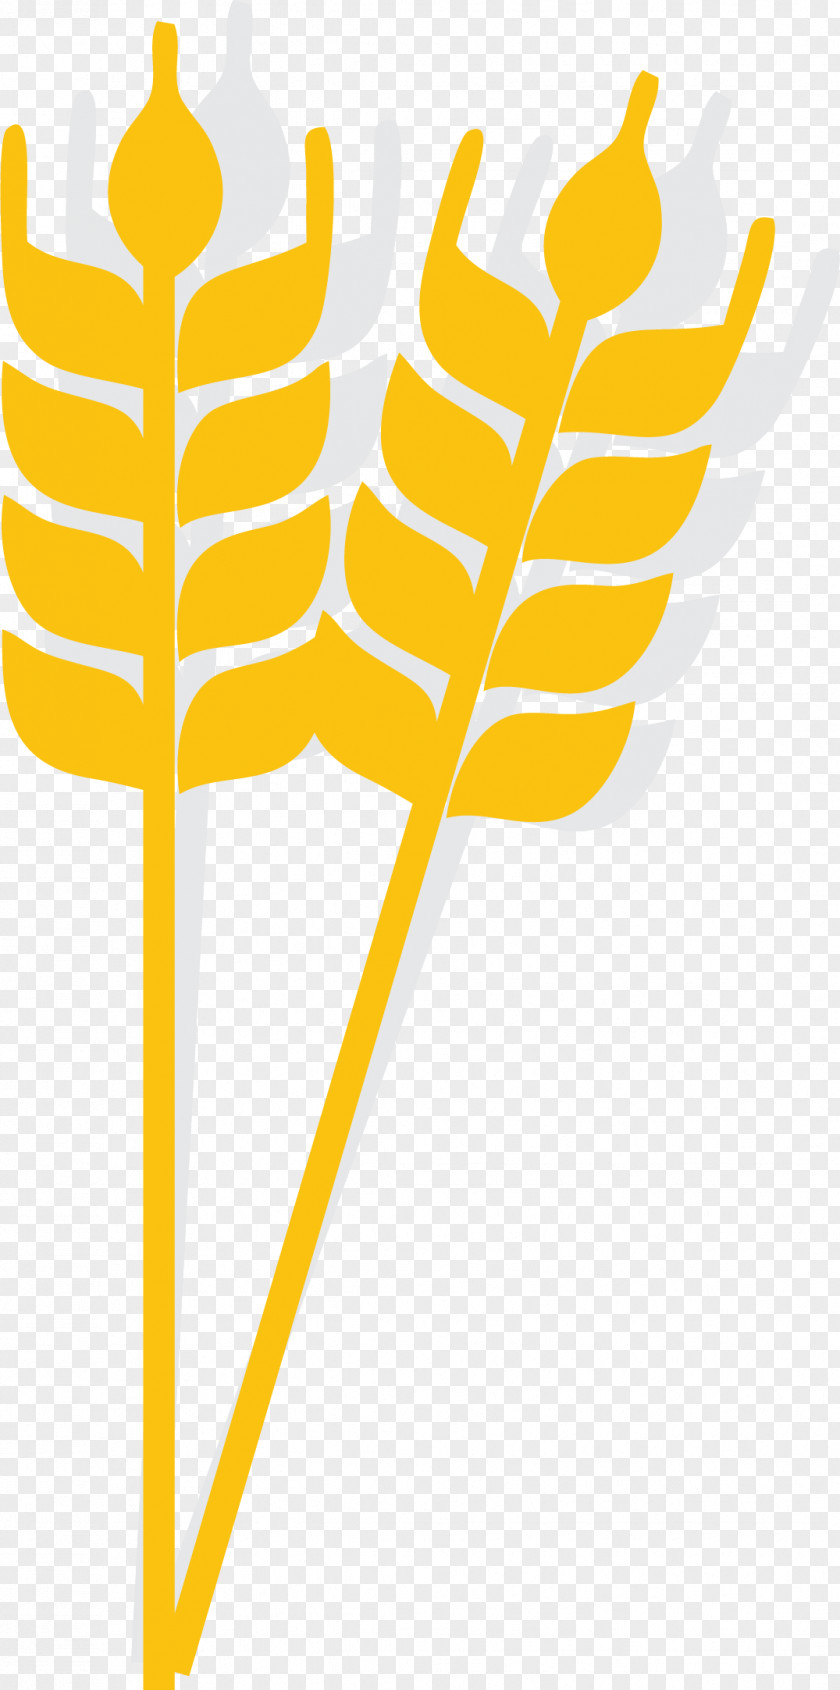 Gold Cartoon Rice Spike Icon Wheat PNG